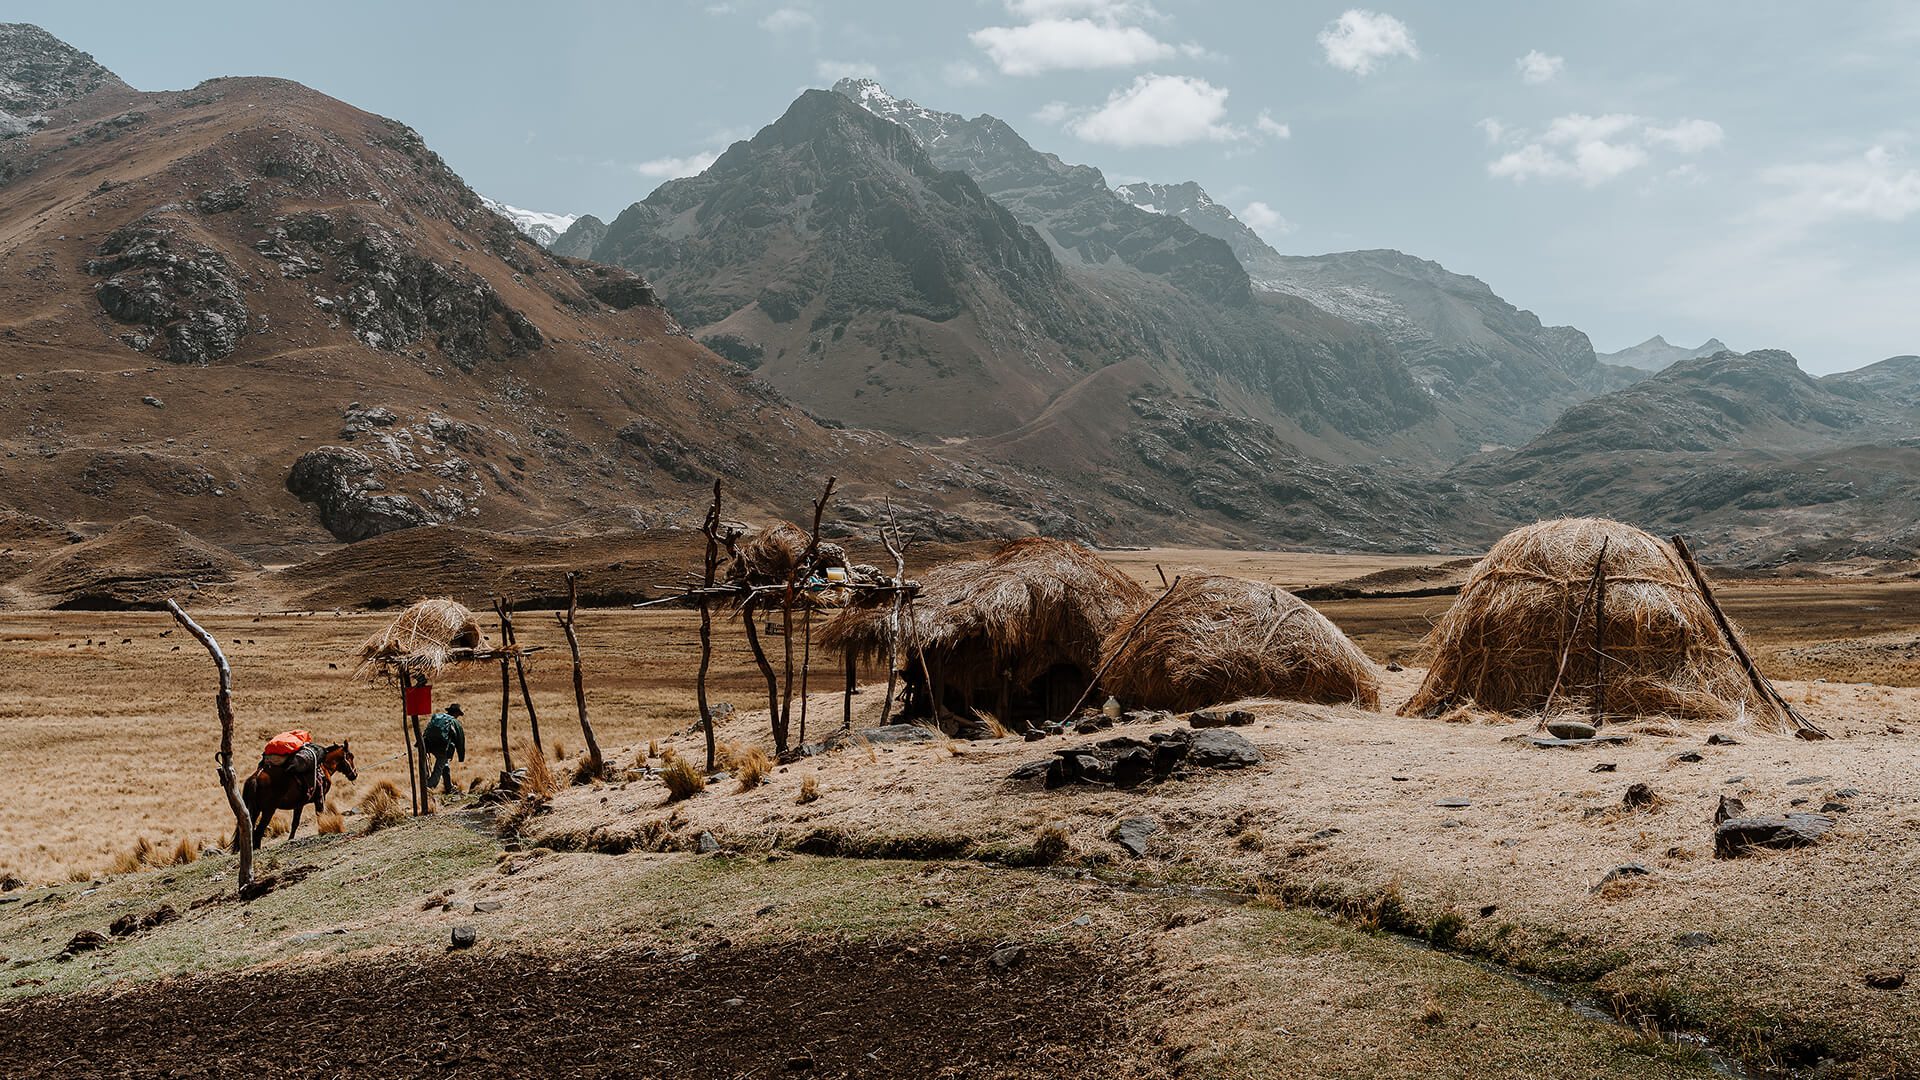 Man, horse, grass-roofed huts in an Andean mountain scenery | Llama Trek Olleros to Chavin with RESPONSible Travel Peru | Photo by Bjorn Snelders